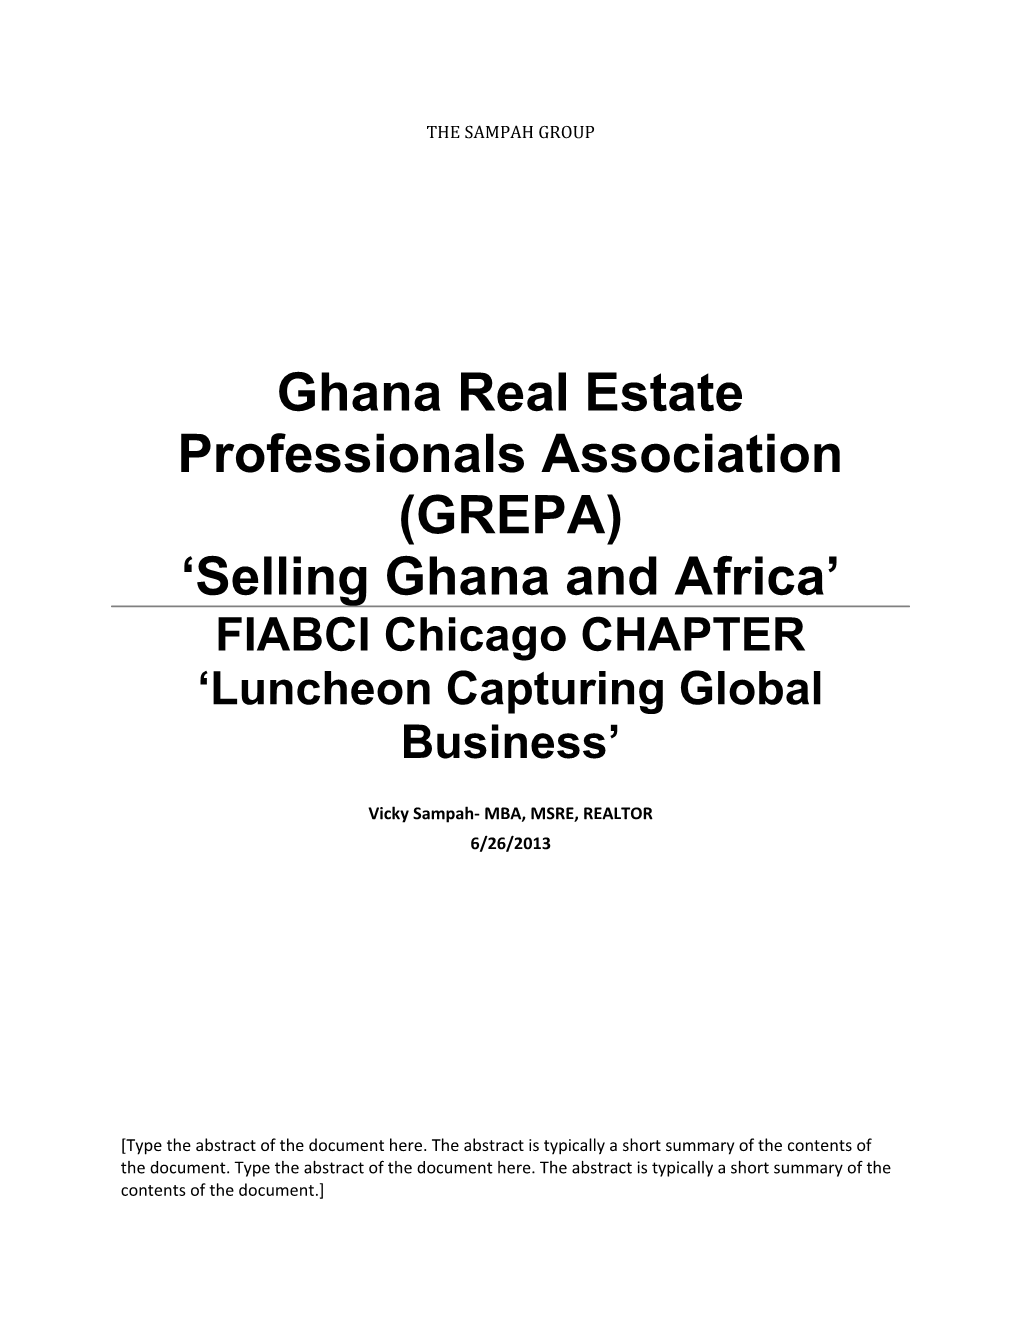 Ghana Real Estate Professionals Association (GREPA) Selling Ghana and Africa